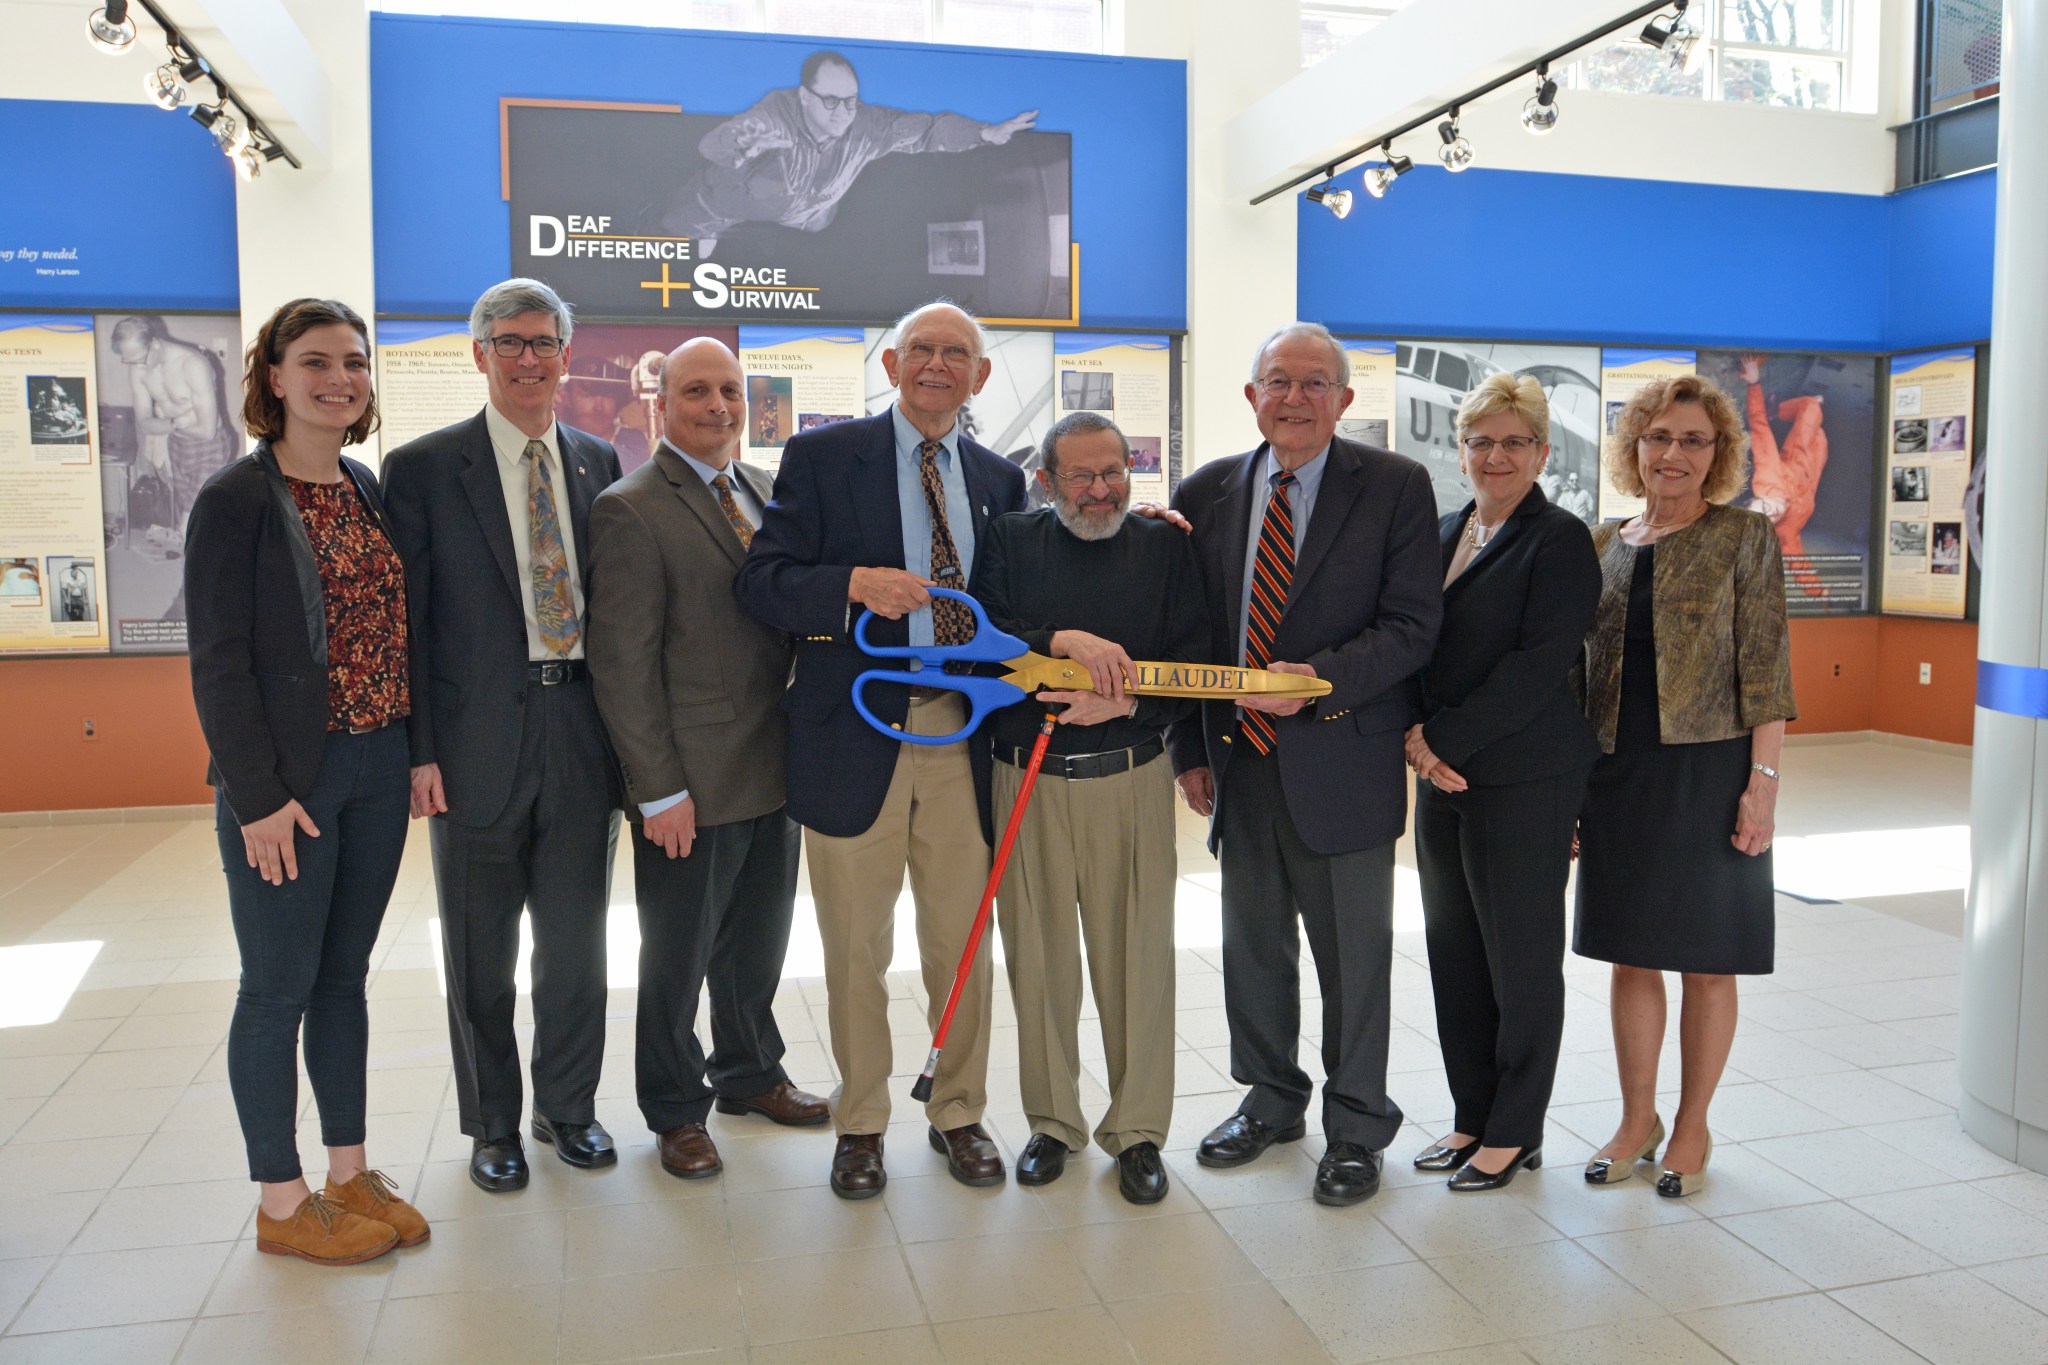 Ribbon-cutting ceremony for the Gallaudet exhibit. 